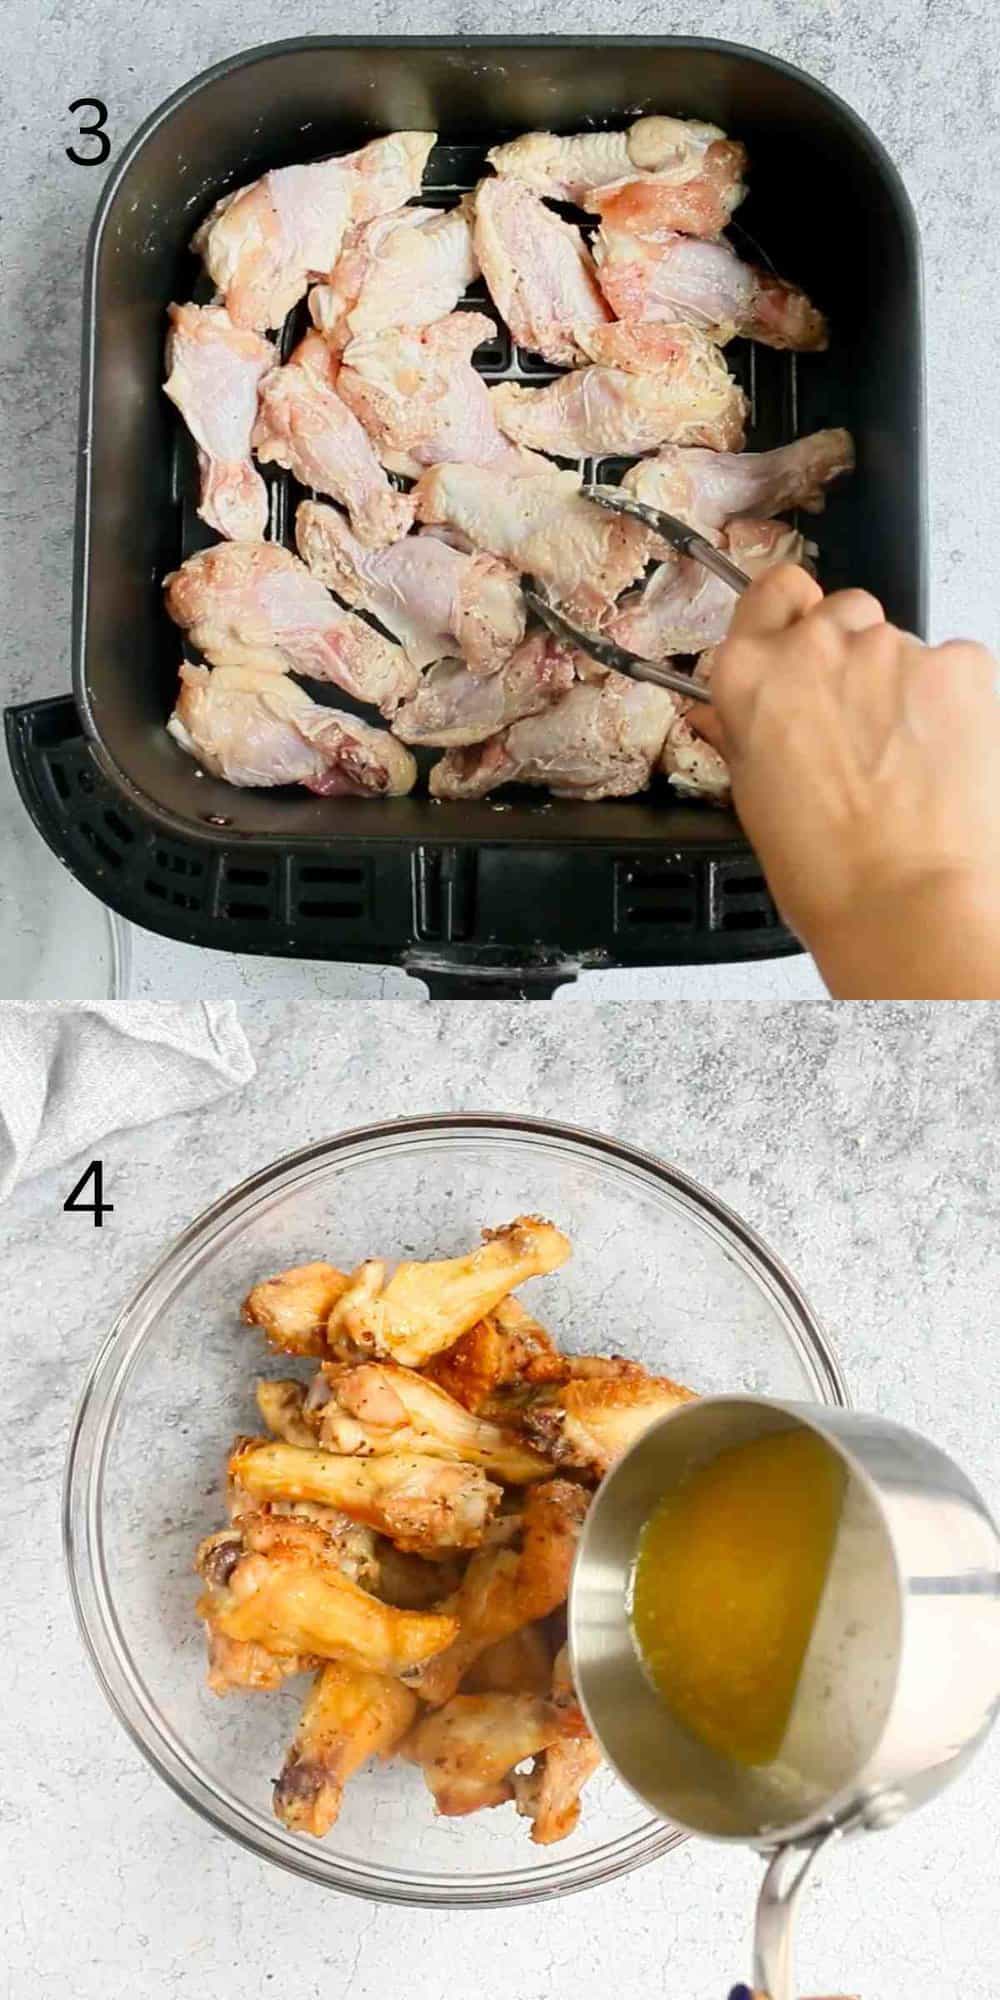 2 photo collage of placing wings in an air fryer basket and then pouring butter into the cooked wings.